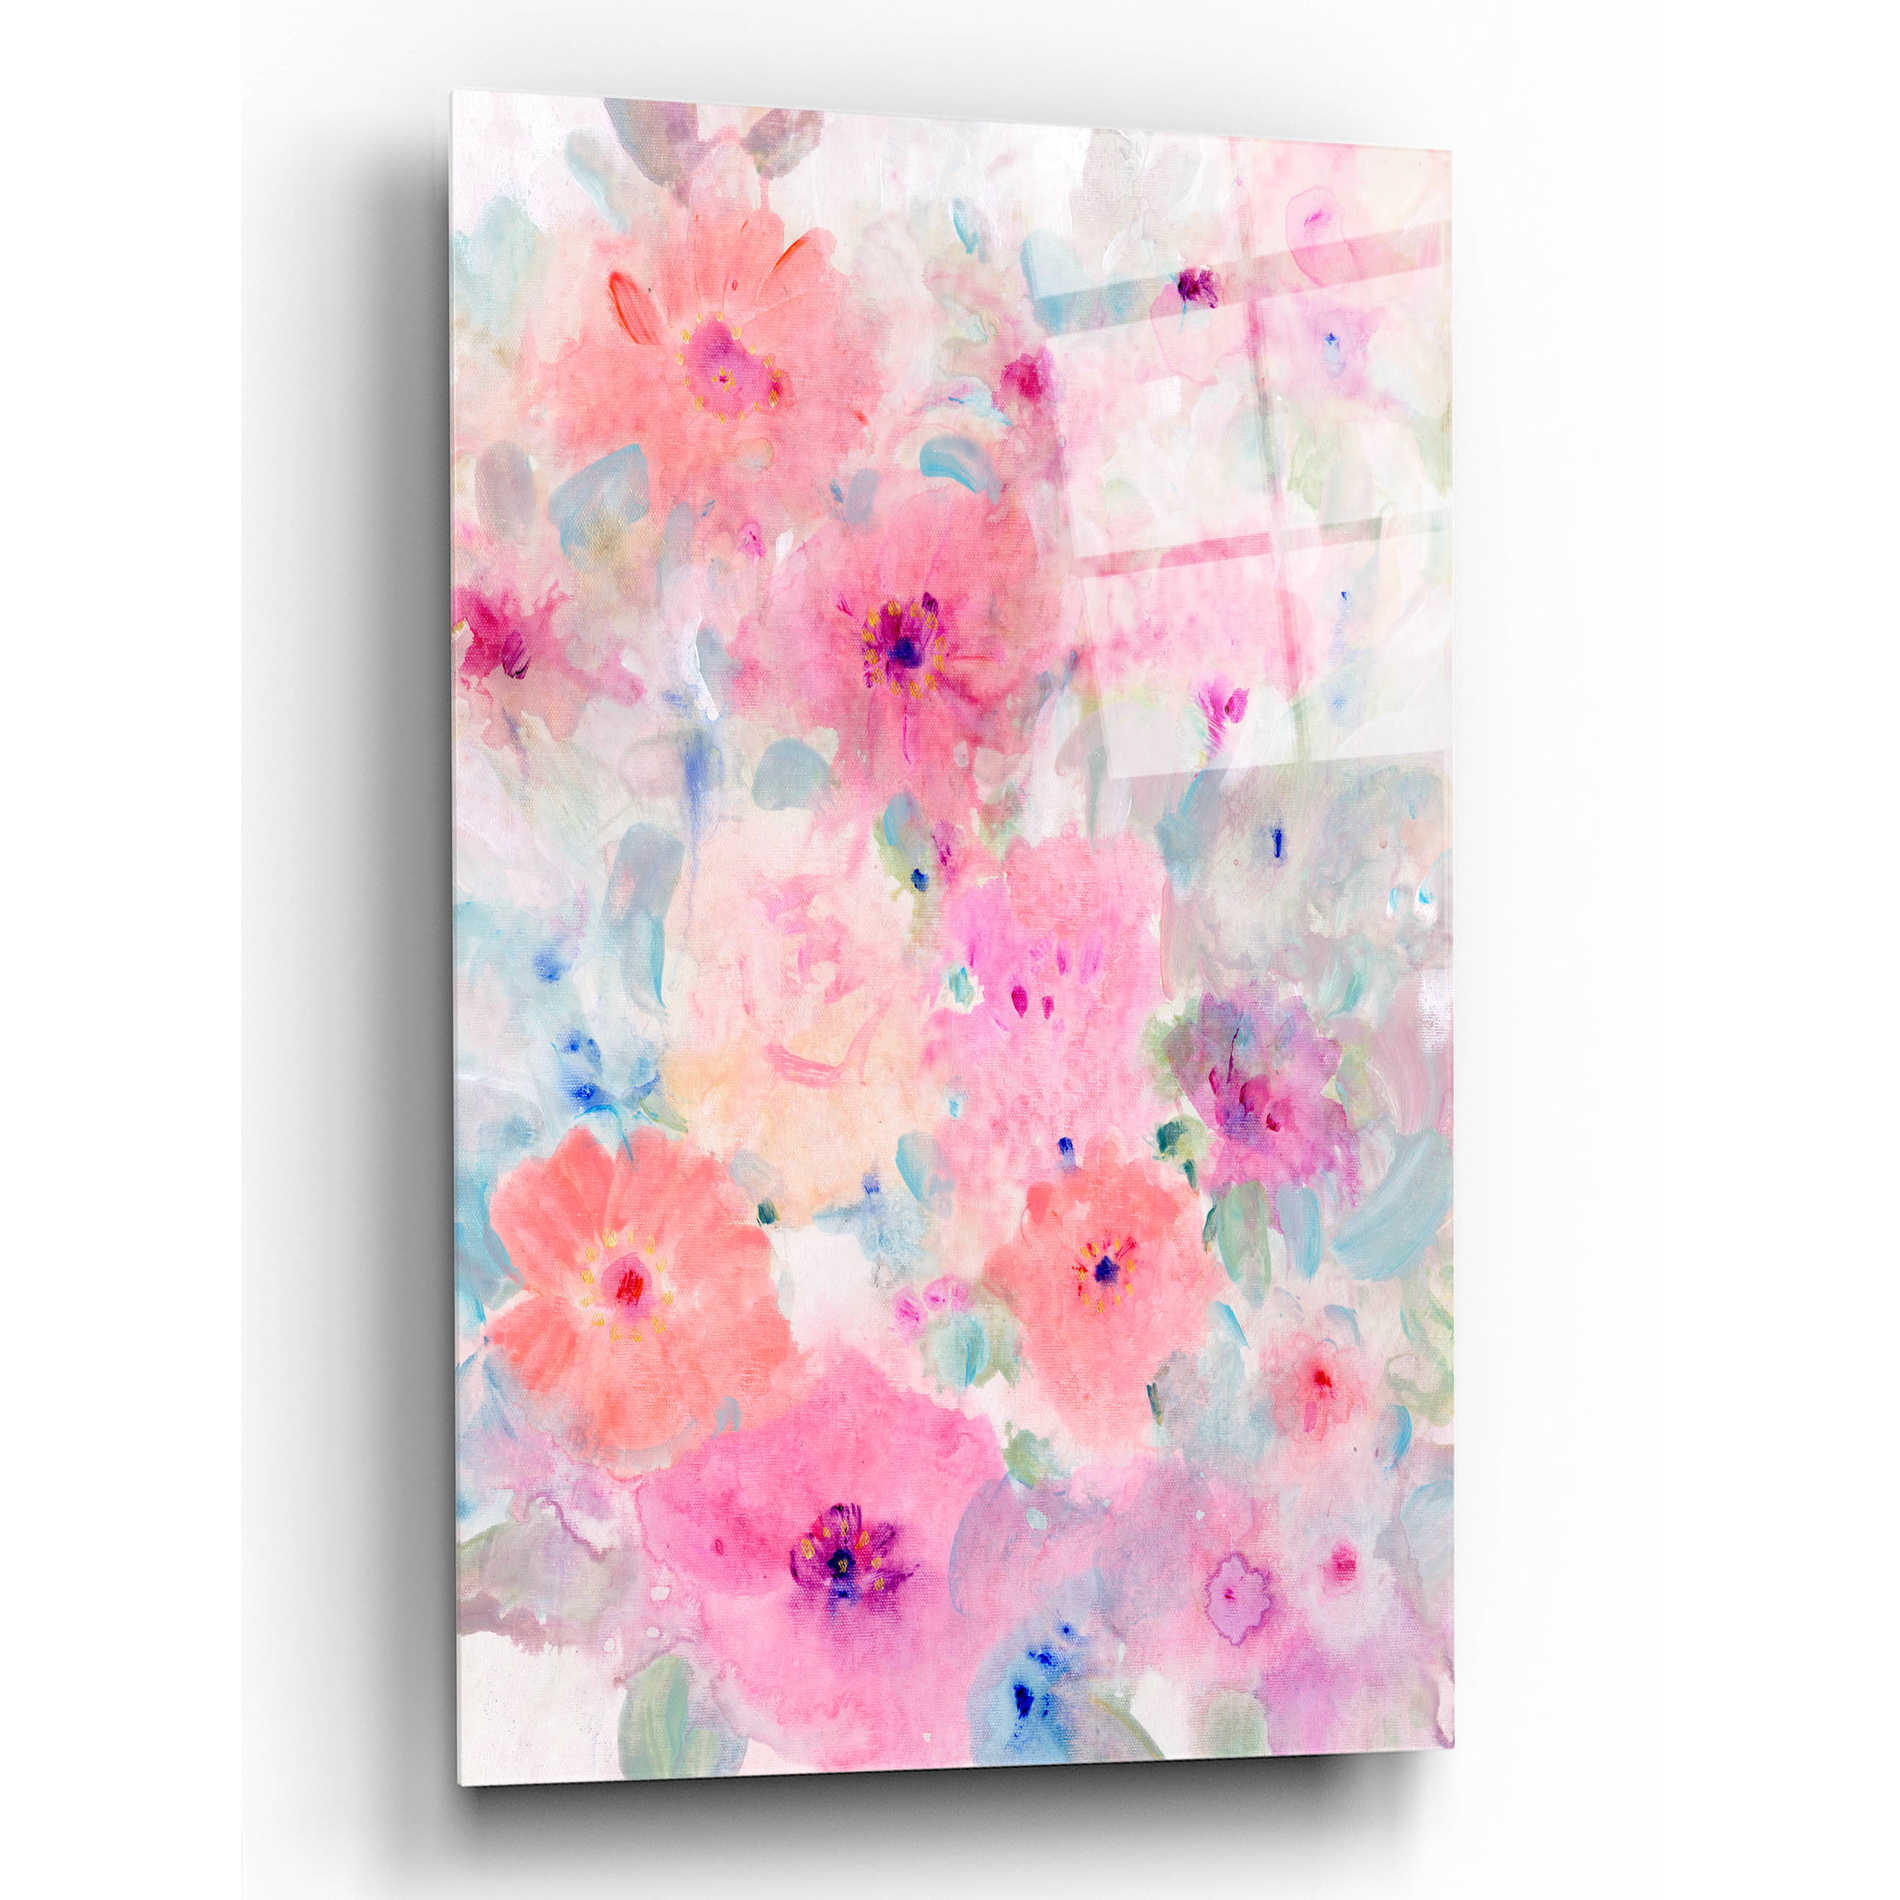 Epic Art 'Bright Floral Design  I' by Tim O'Toole, Acrylic Glass Wall Art,16x24